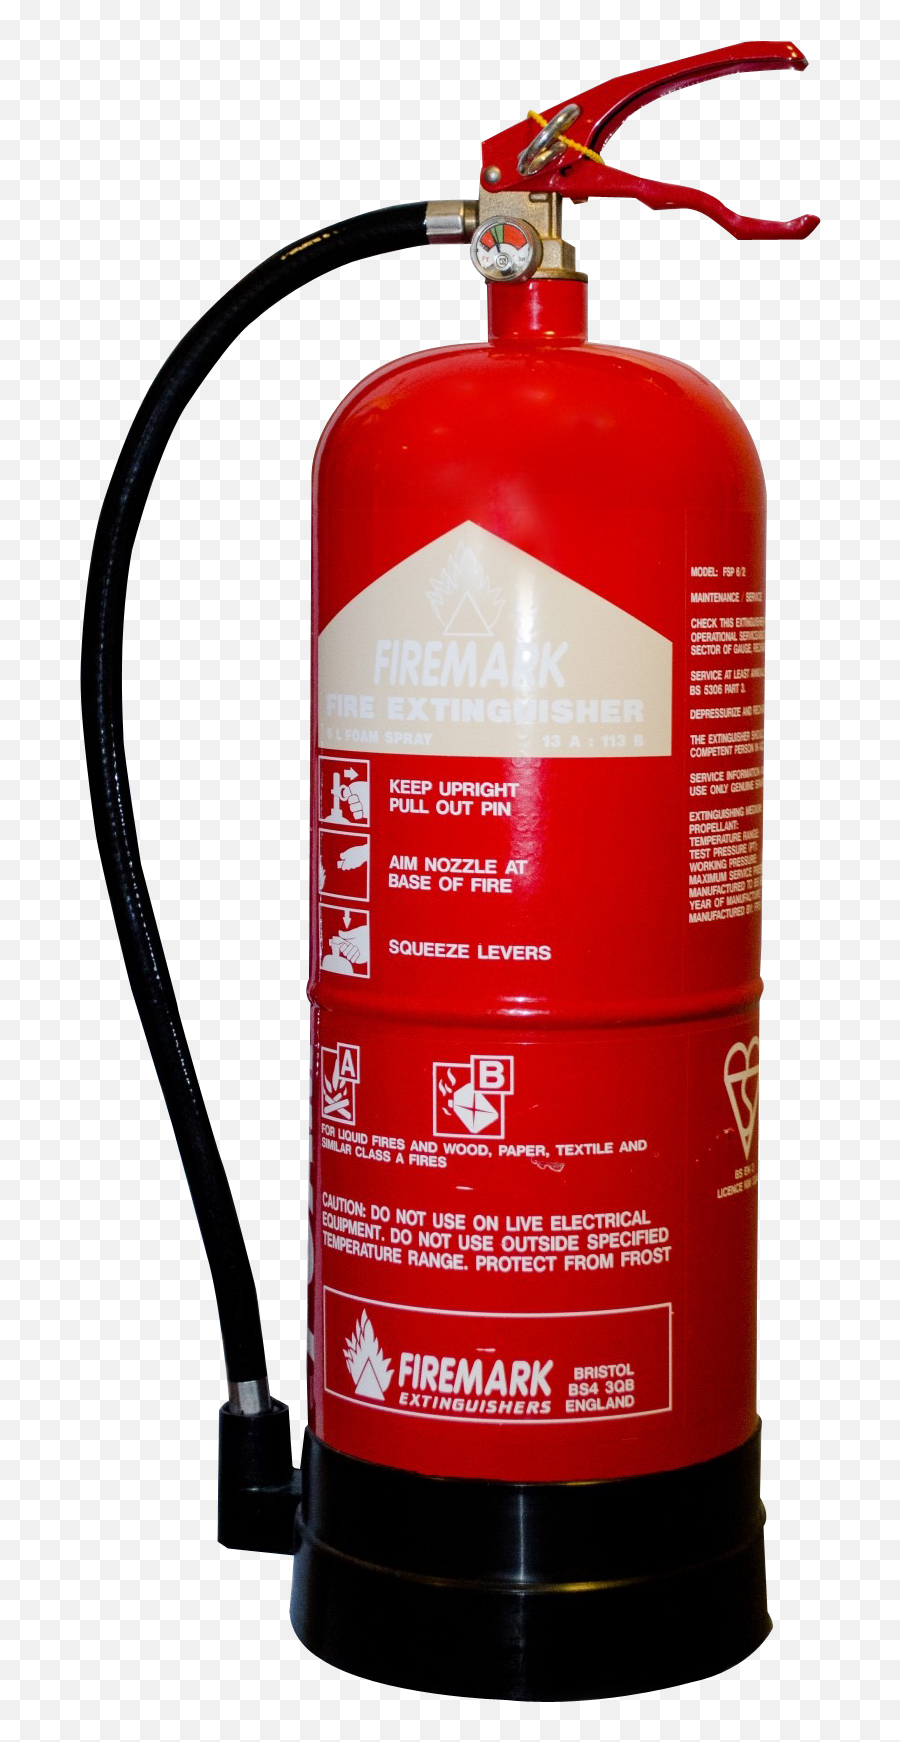 Fireextinguisher Fire Extinguisher Red - Fire Extinguisher Png File Emoji,Fire Extinguisher Emoji